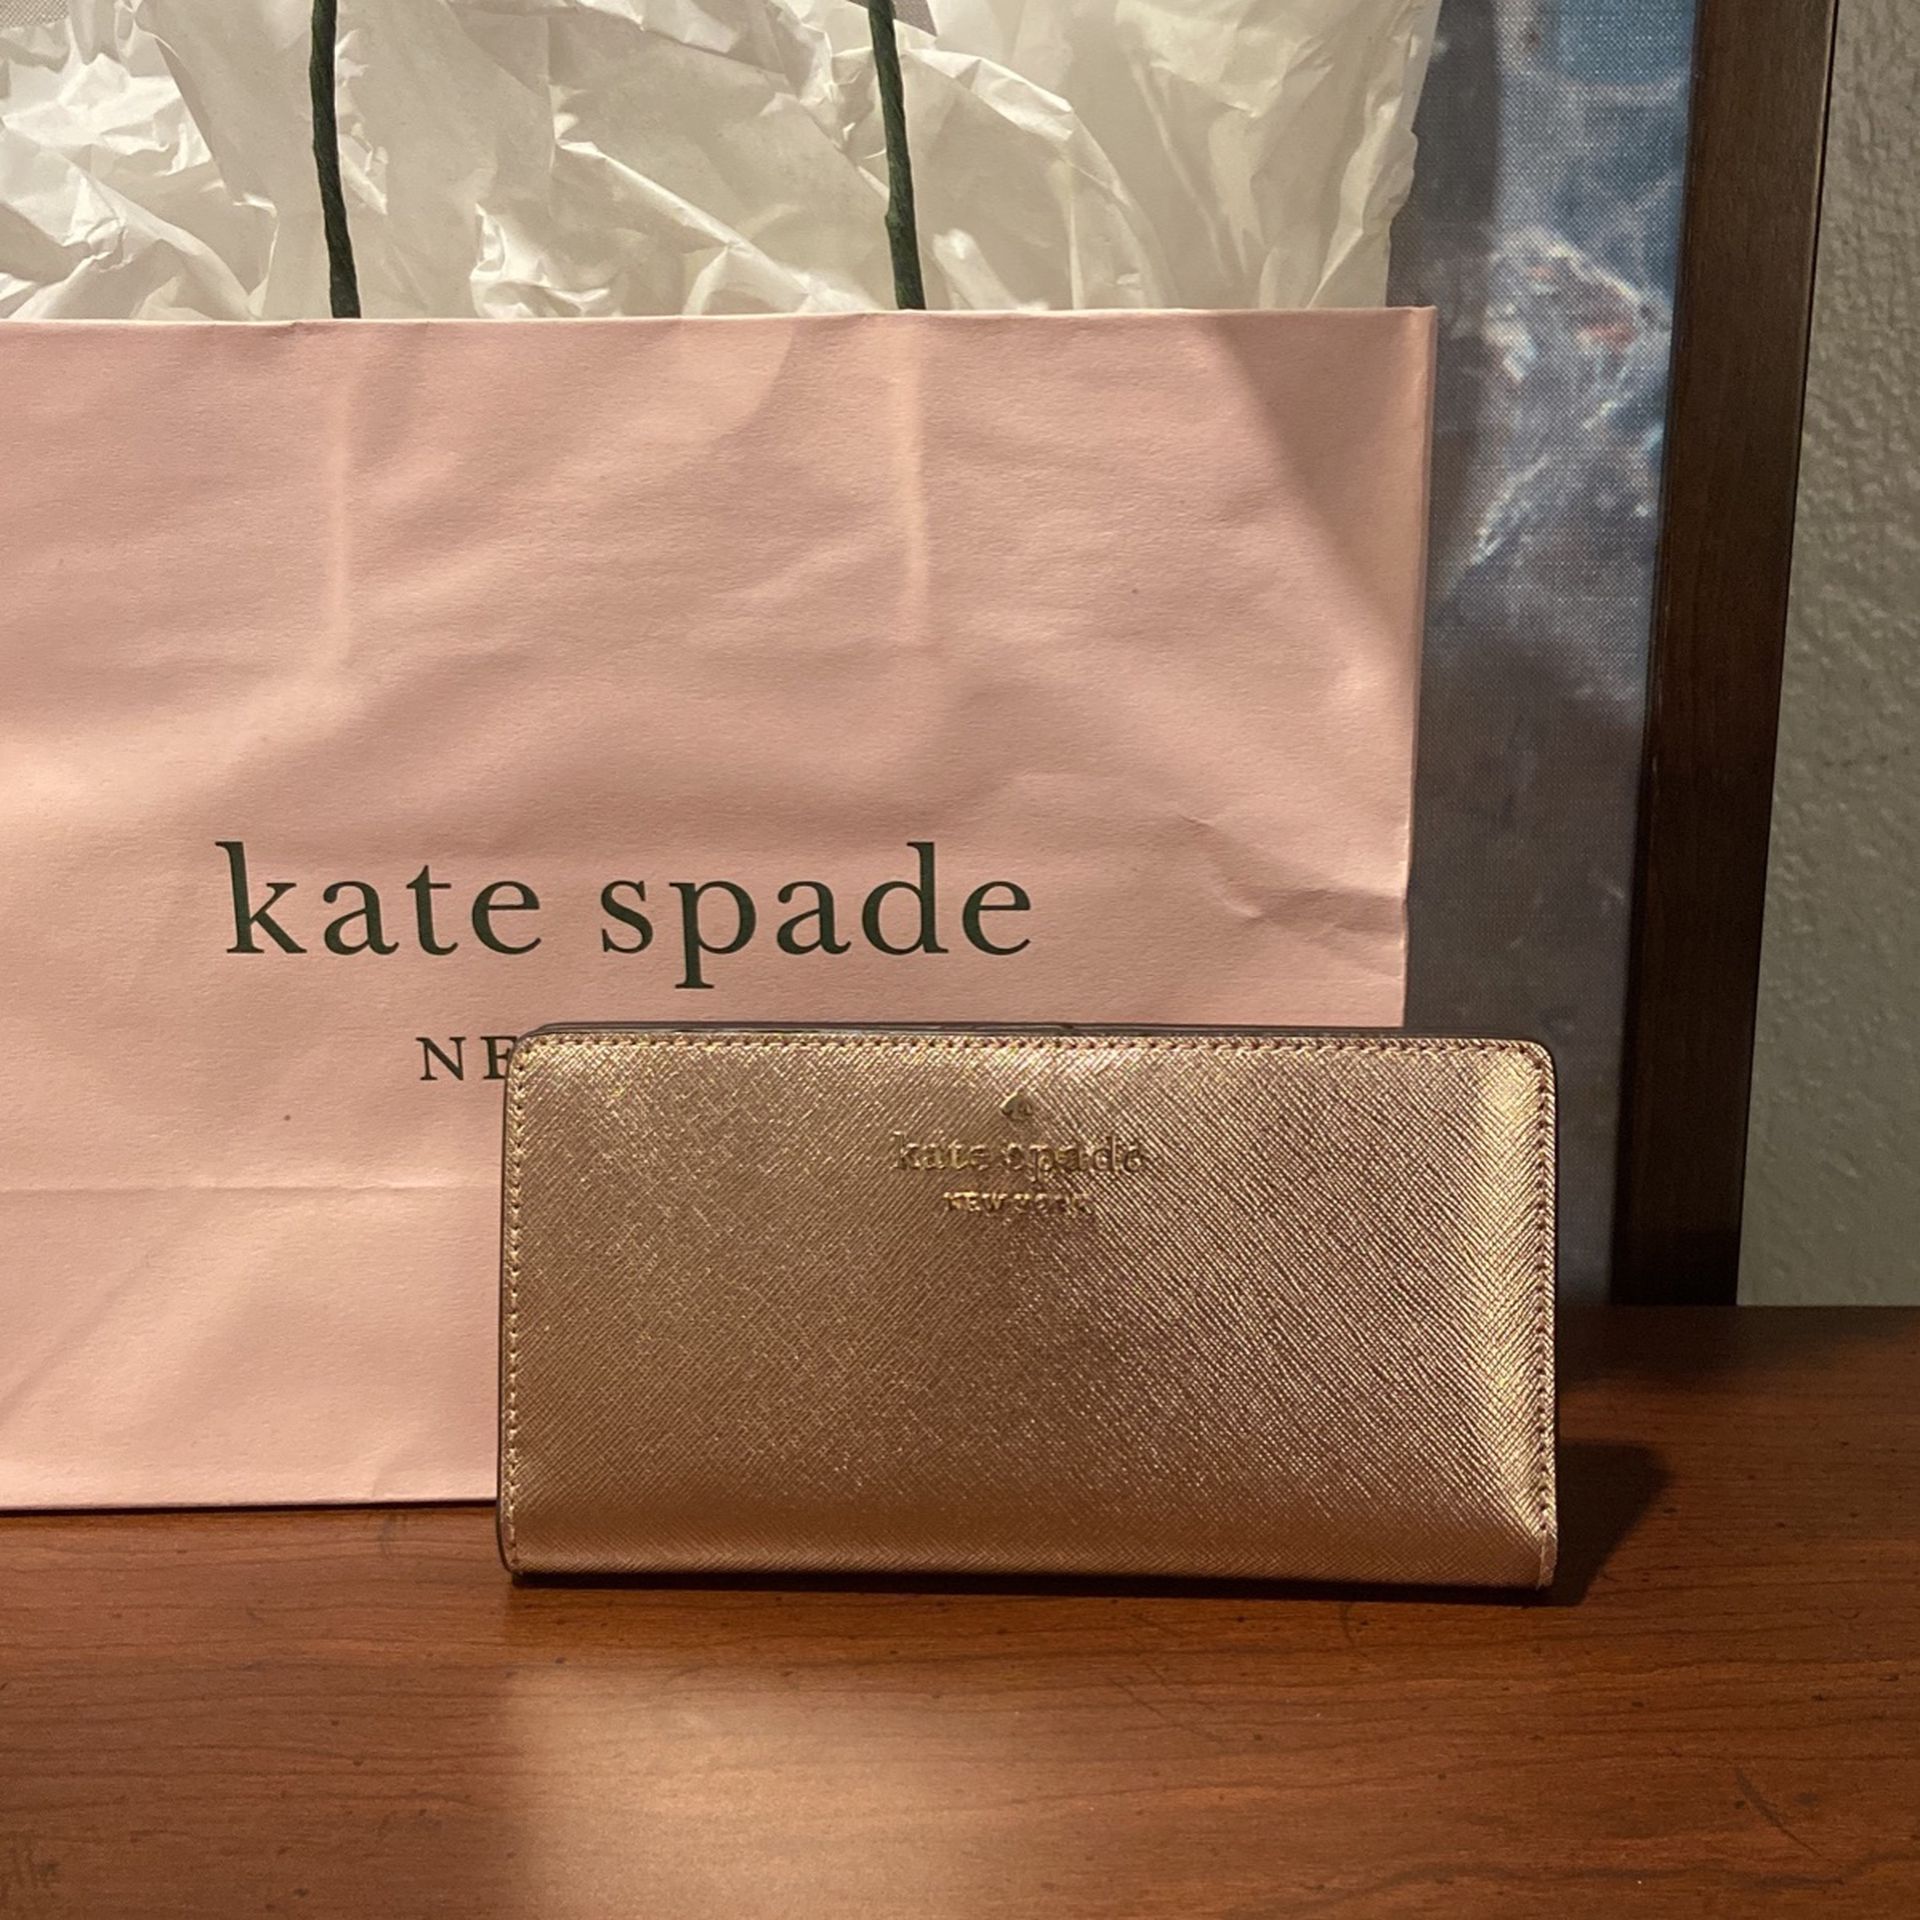 Authentic / Brand New Kate Spade Wallet